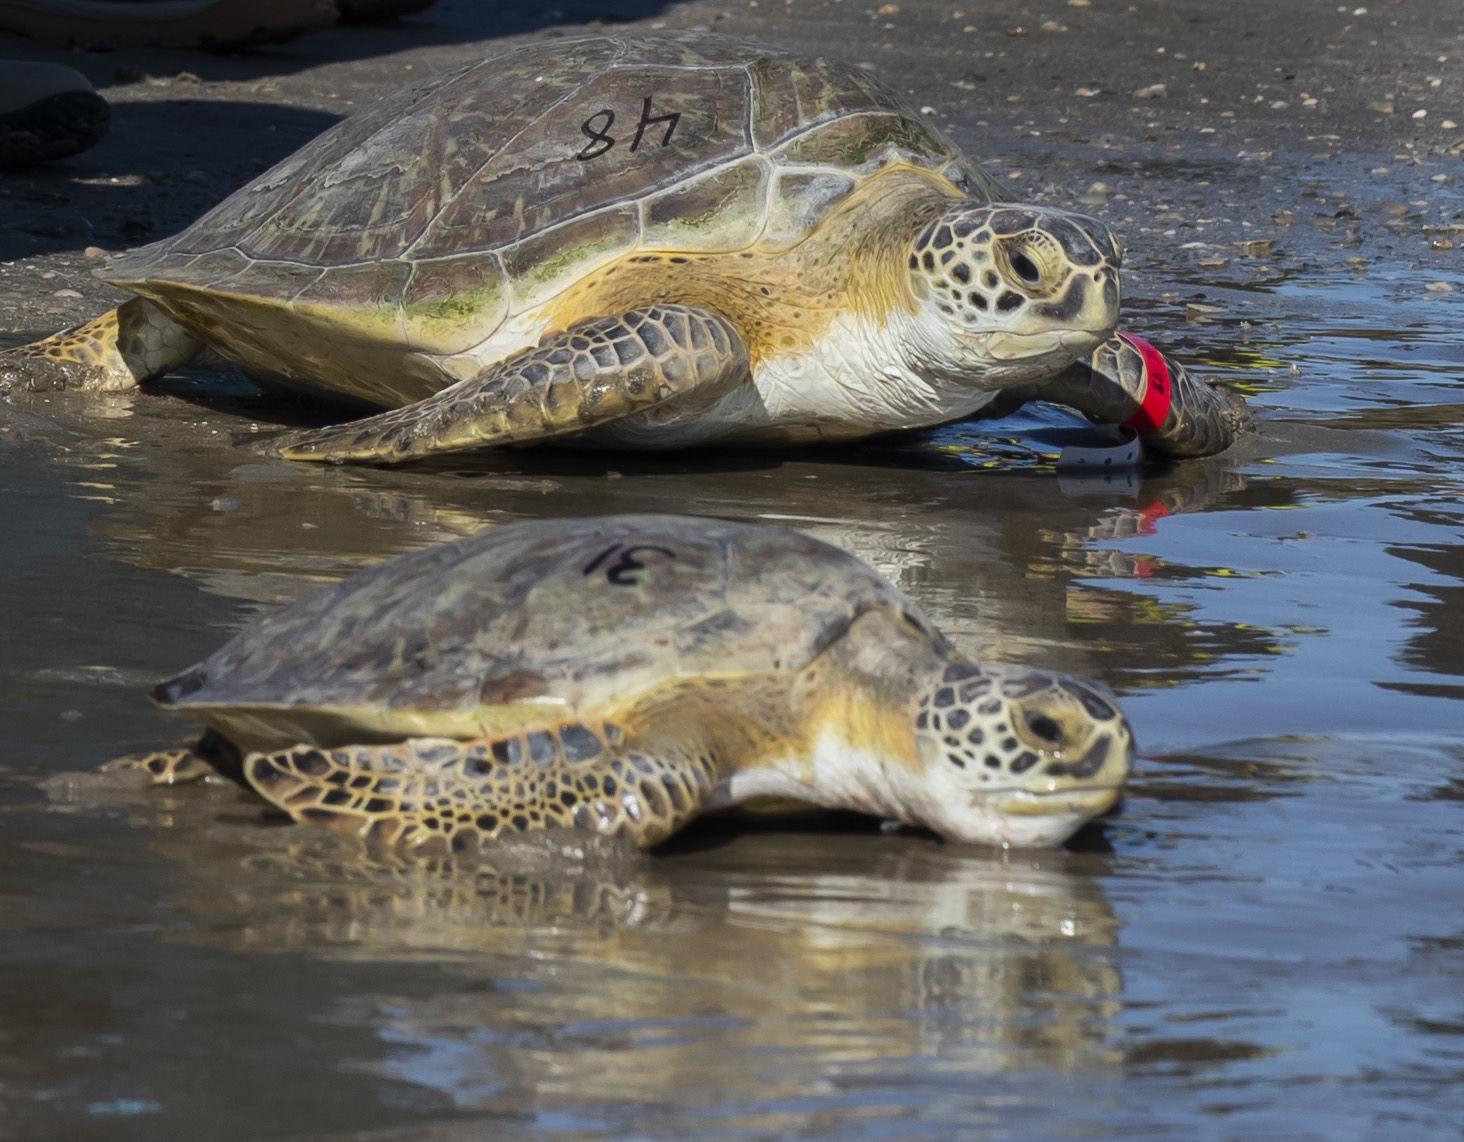 Endangered sea turtles discovered nesting on Texas beach